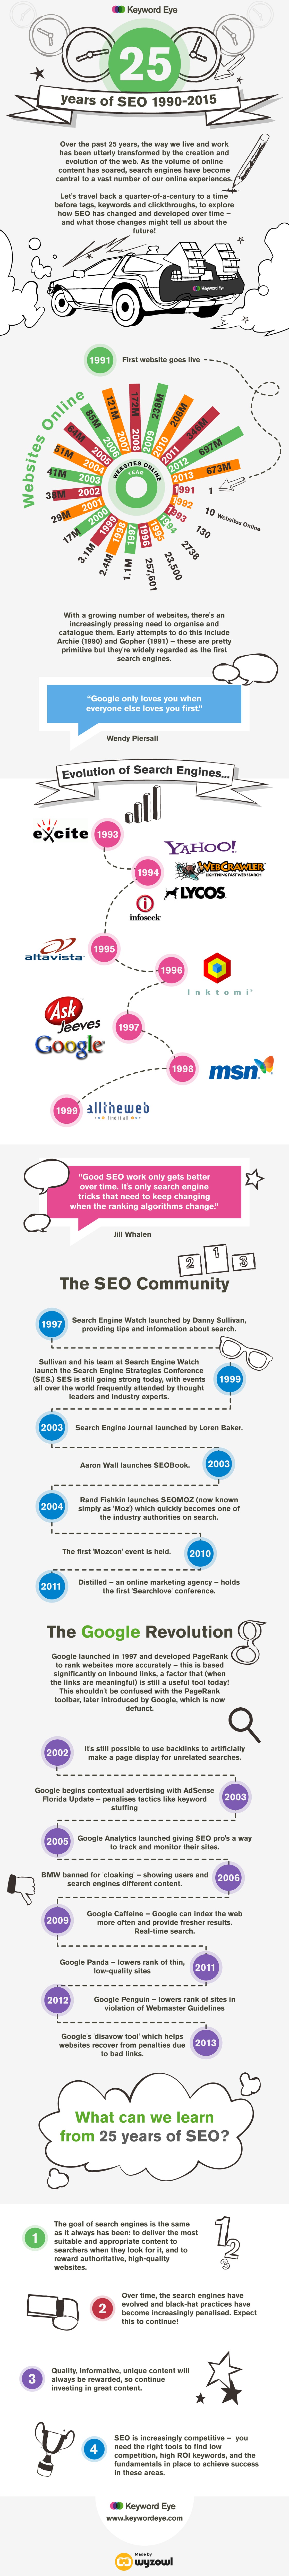 25-Years-of-SEO-infographic